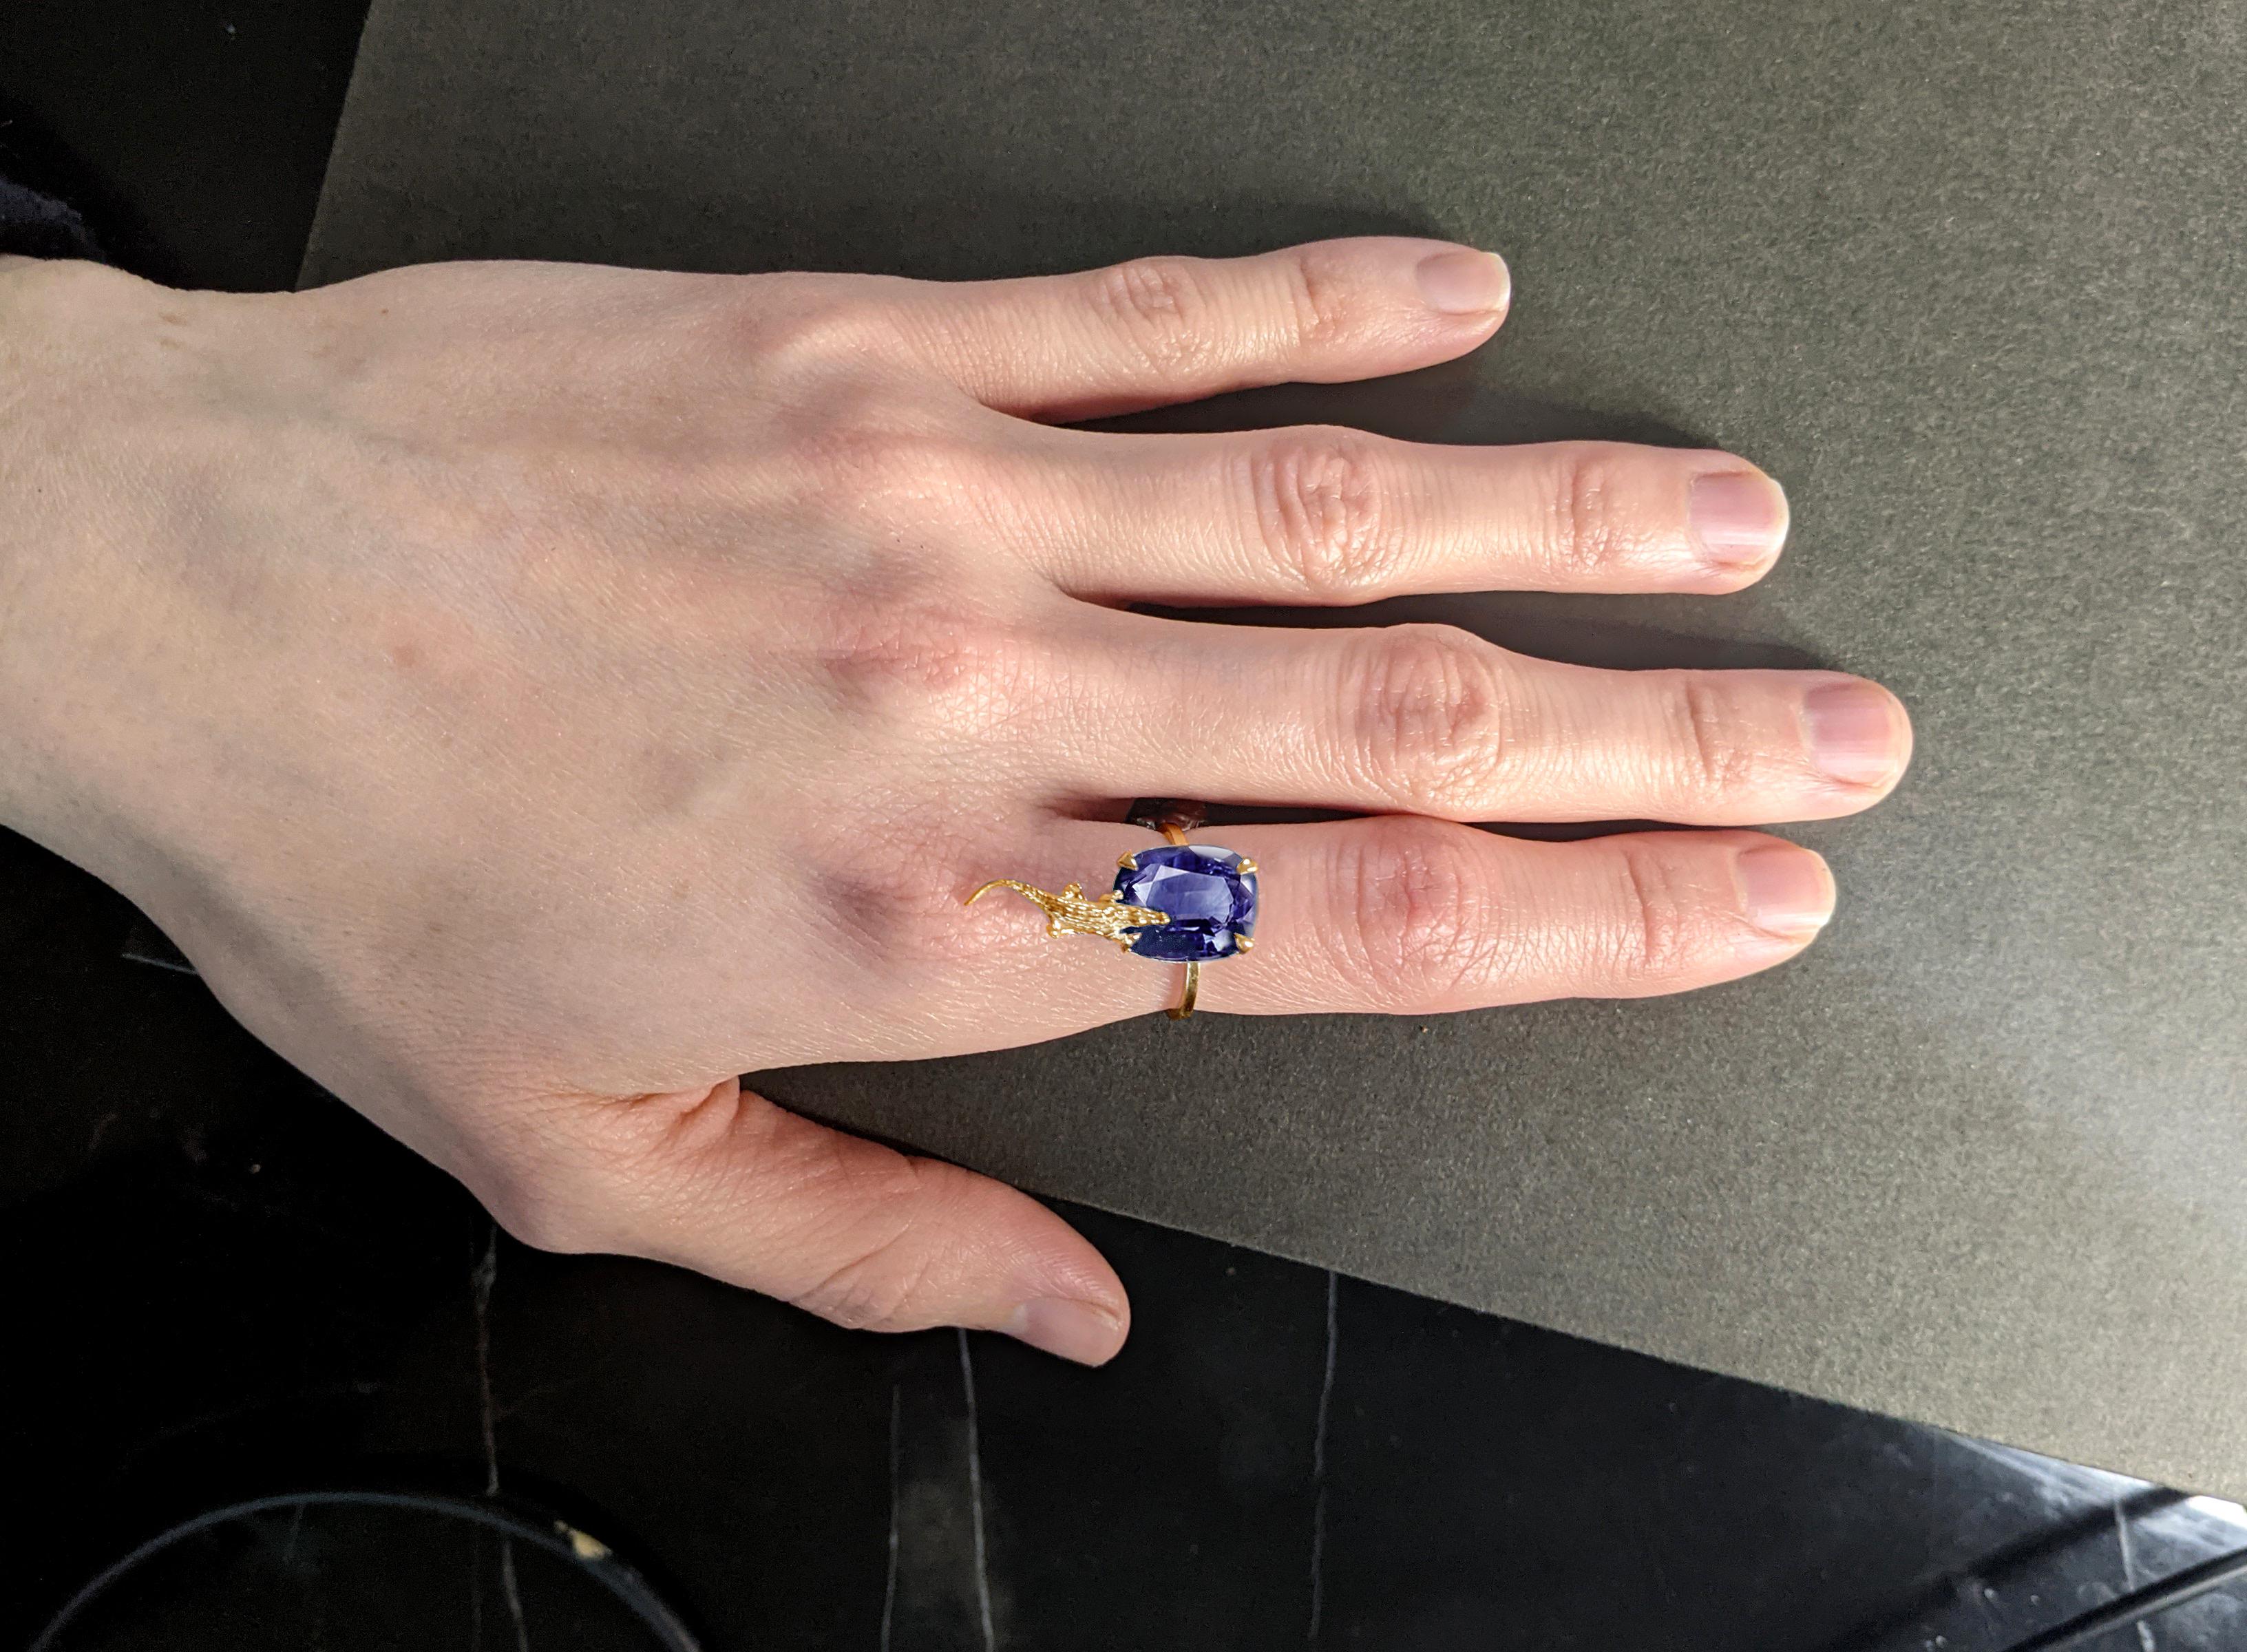 This 18 karat yellow gold contemporary Mesopotamian ring is encrusted with GIL certified 7.96 carats natural unheated vivid cornflower blue cushion sapphire, 11.16x8.71 mm. The gem catches eye's attention and well designed in contemporary design